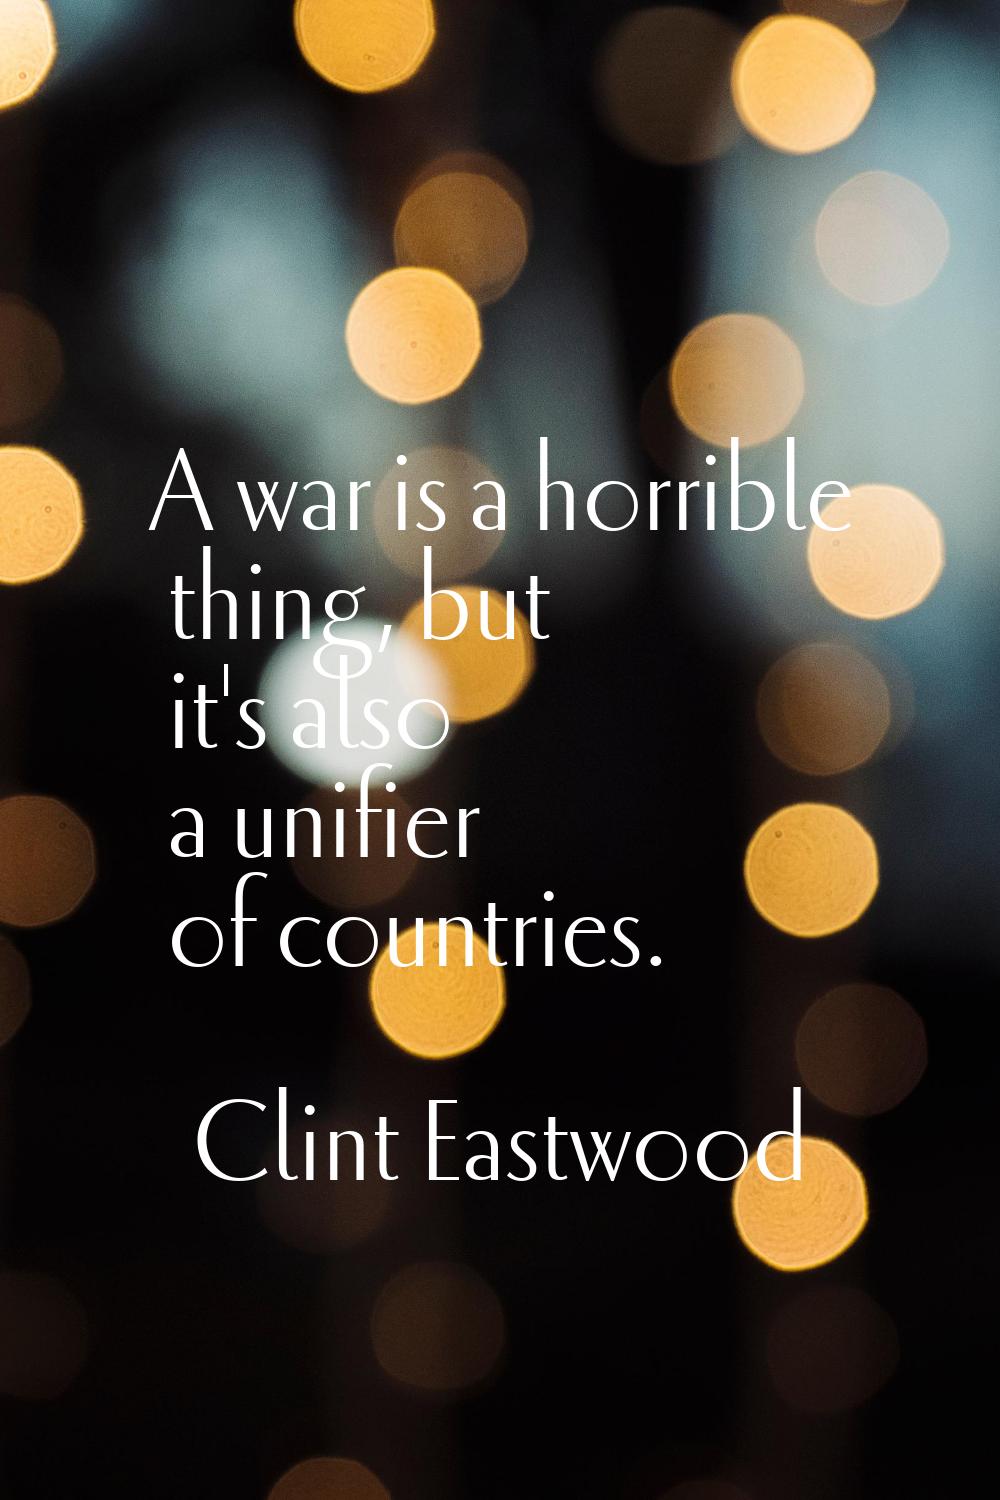 A war is a horrible thing, but it's also a unifier of countries.